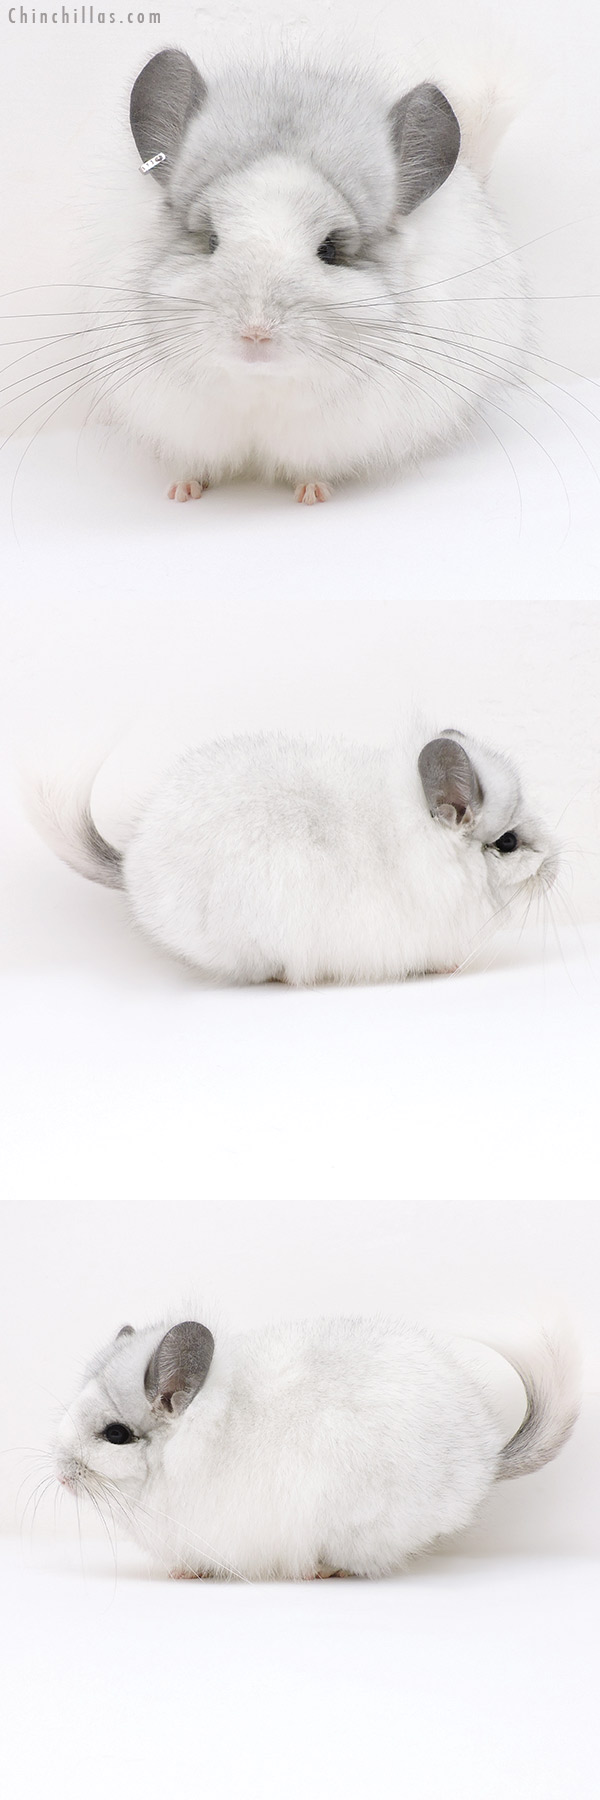 Chinchilla or related item offered for sale or export on Chinchillas.com - 19179 Exceptional White Mosaic  Royal Persian Angora Female Chinchilla